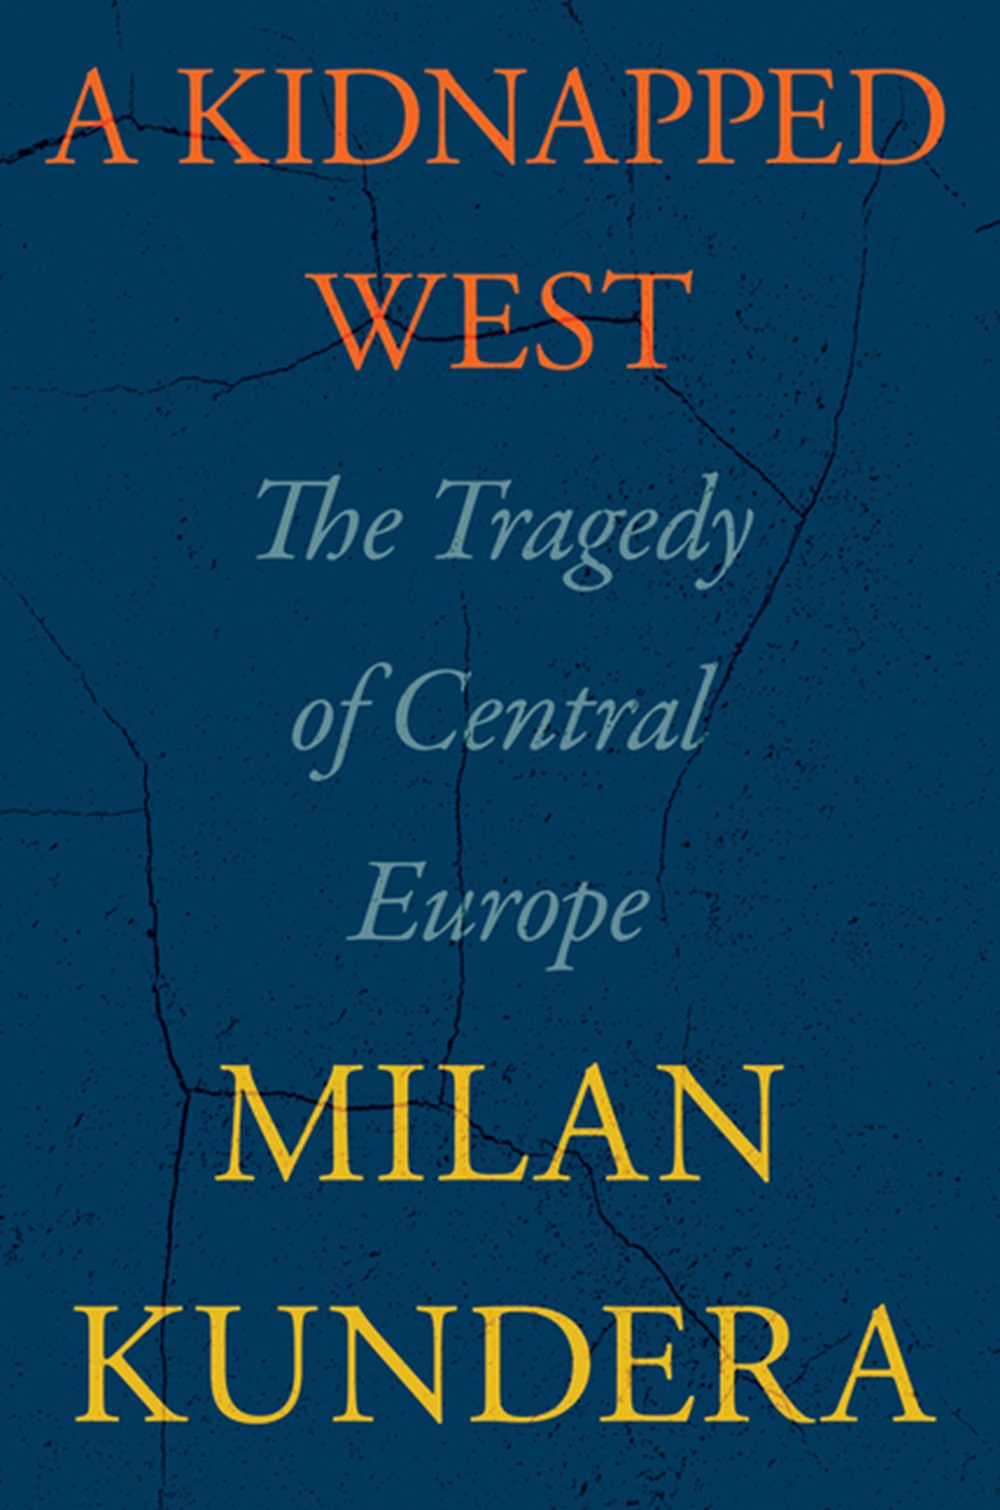 Kidnapped West: The Tragedy of Central Europe